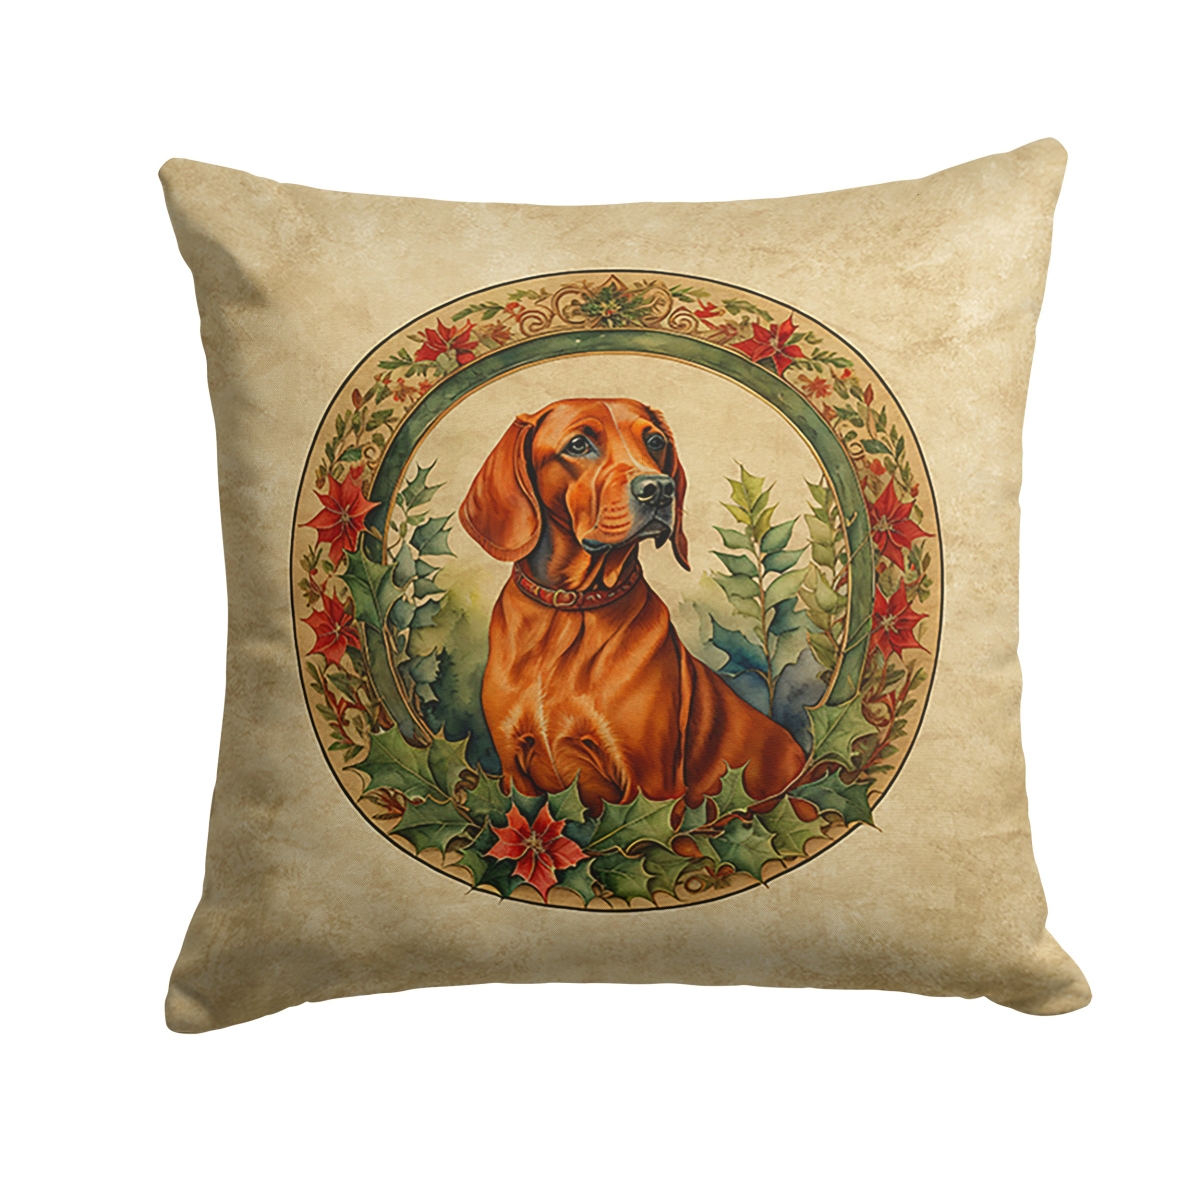 Caroline's Treasures DAC2416PW1818 18 x 18 in. Unisex Red Redbone Coonhound Christmas Flowers Polyester Fabric Throw Pillow